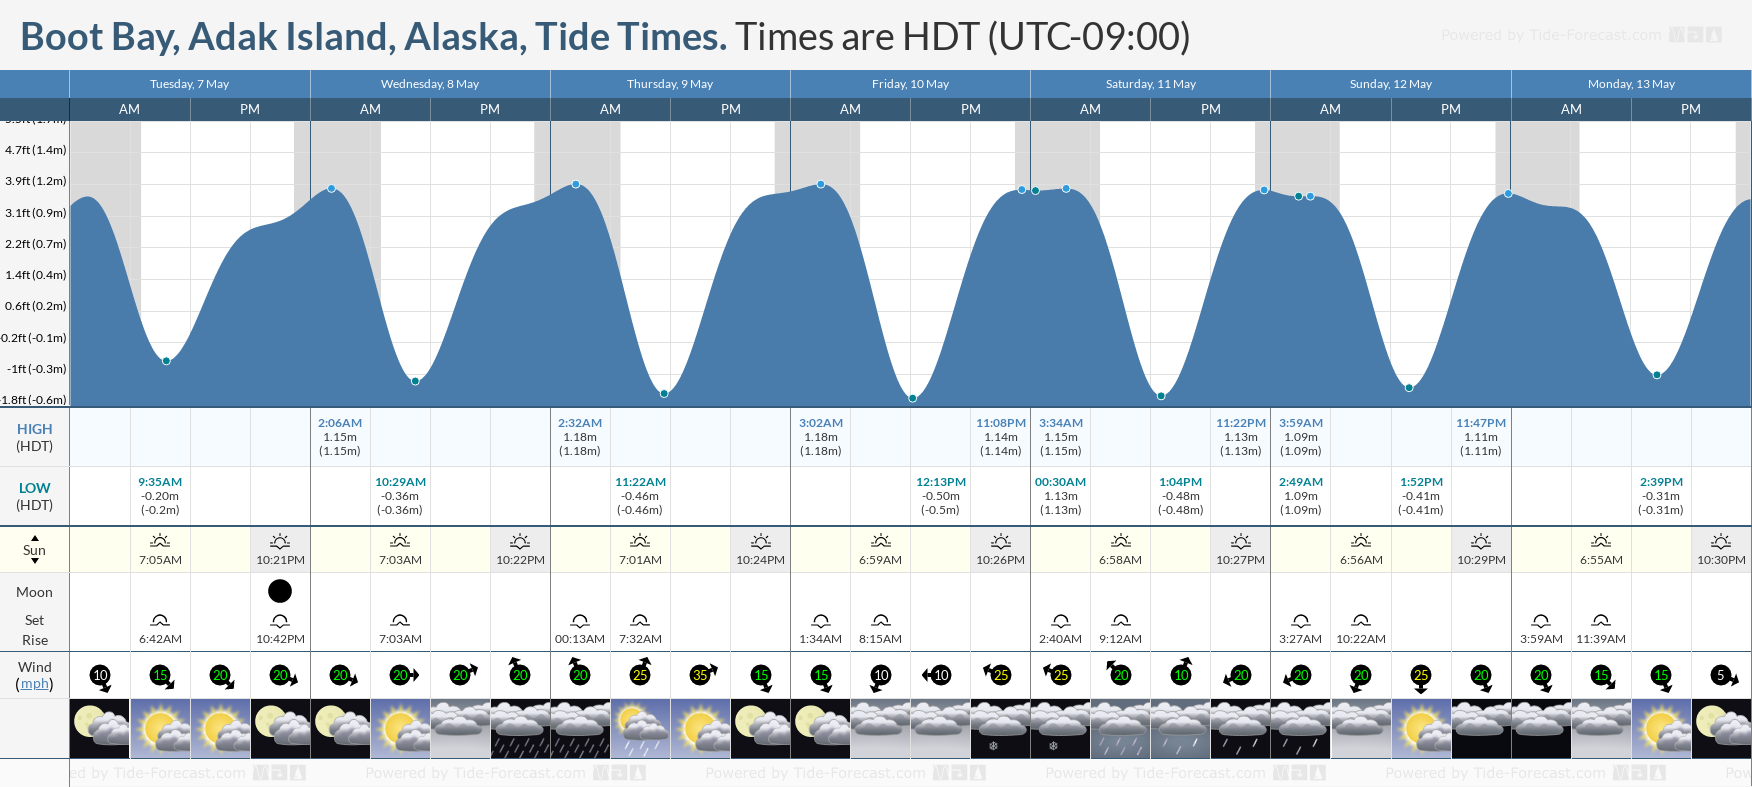 Boot Bay, Adak Island, Alaska Tide Chart including high and low tide times for the next 7 days